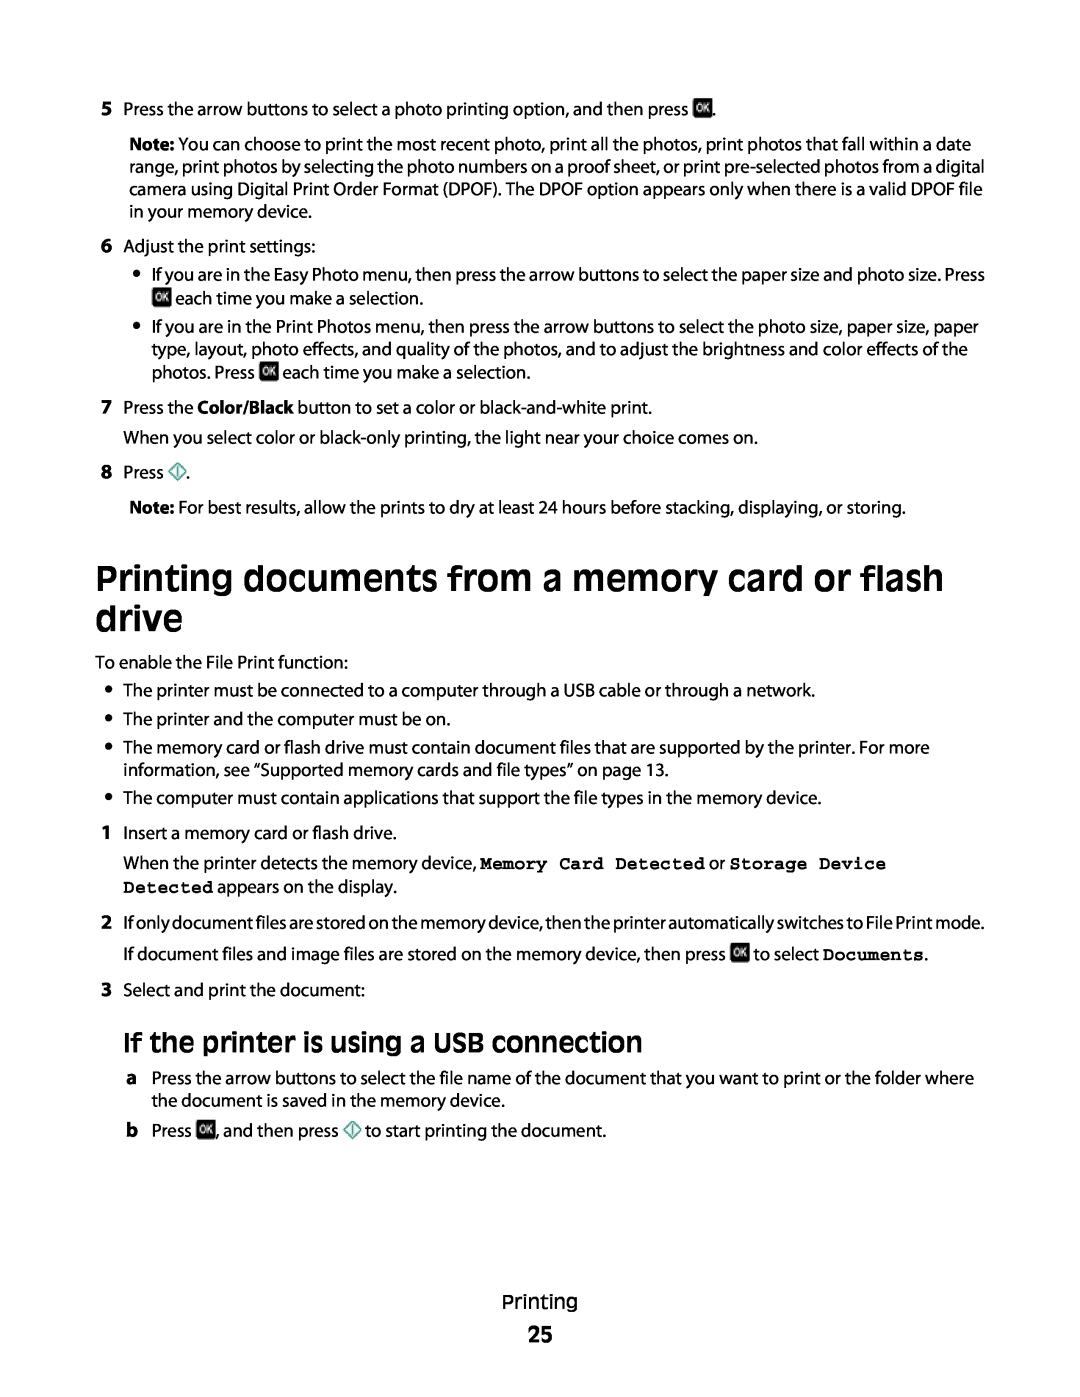 Lexmark S400 manual Printing documents from a memory card or flash drive, If the printer is using a USB connection 